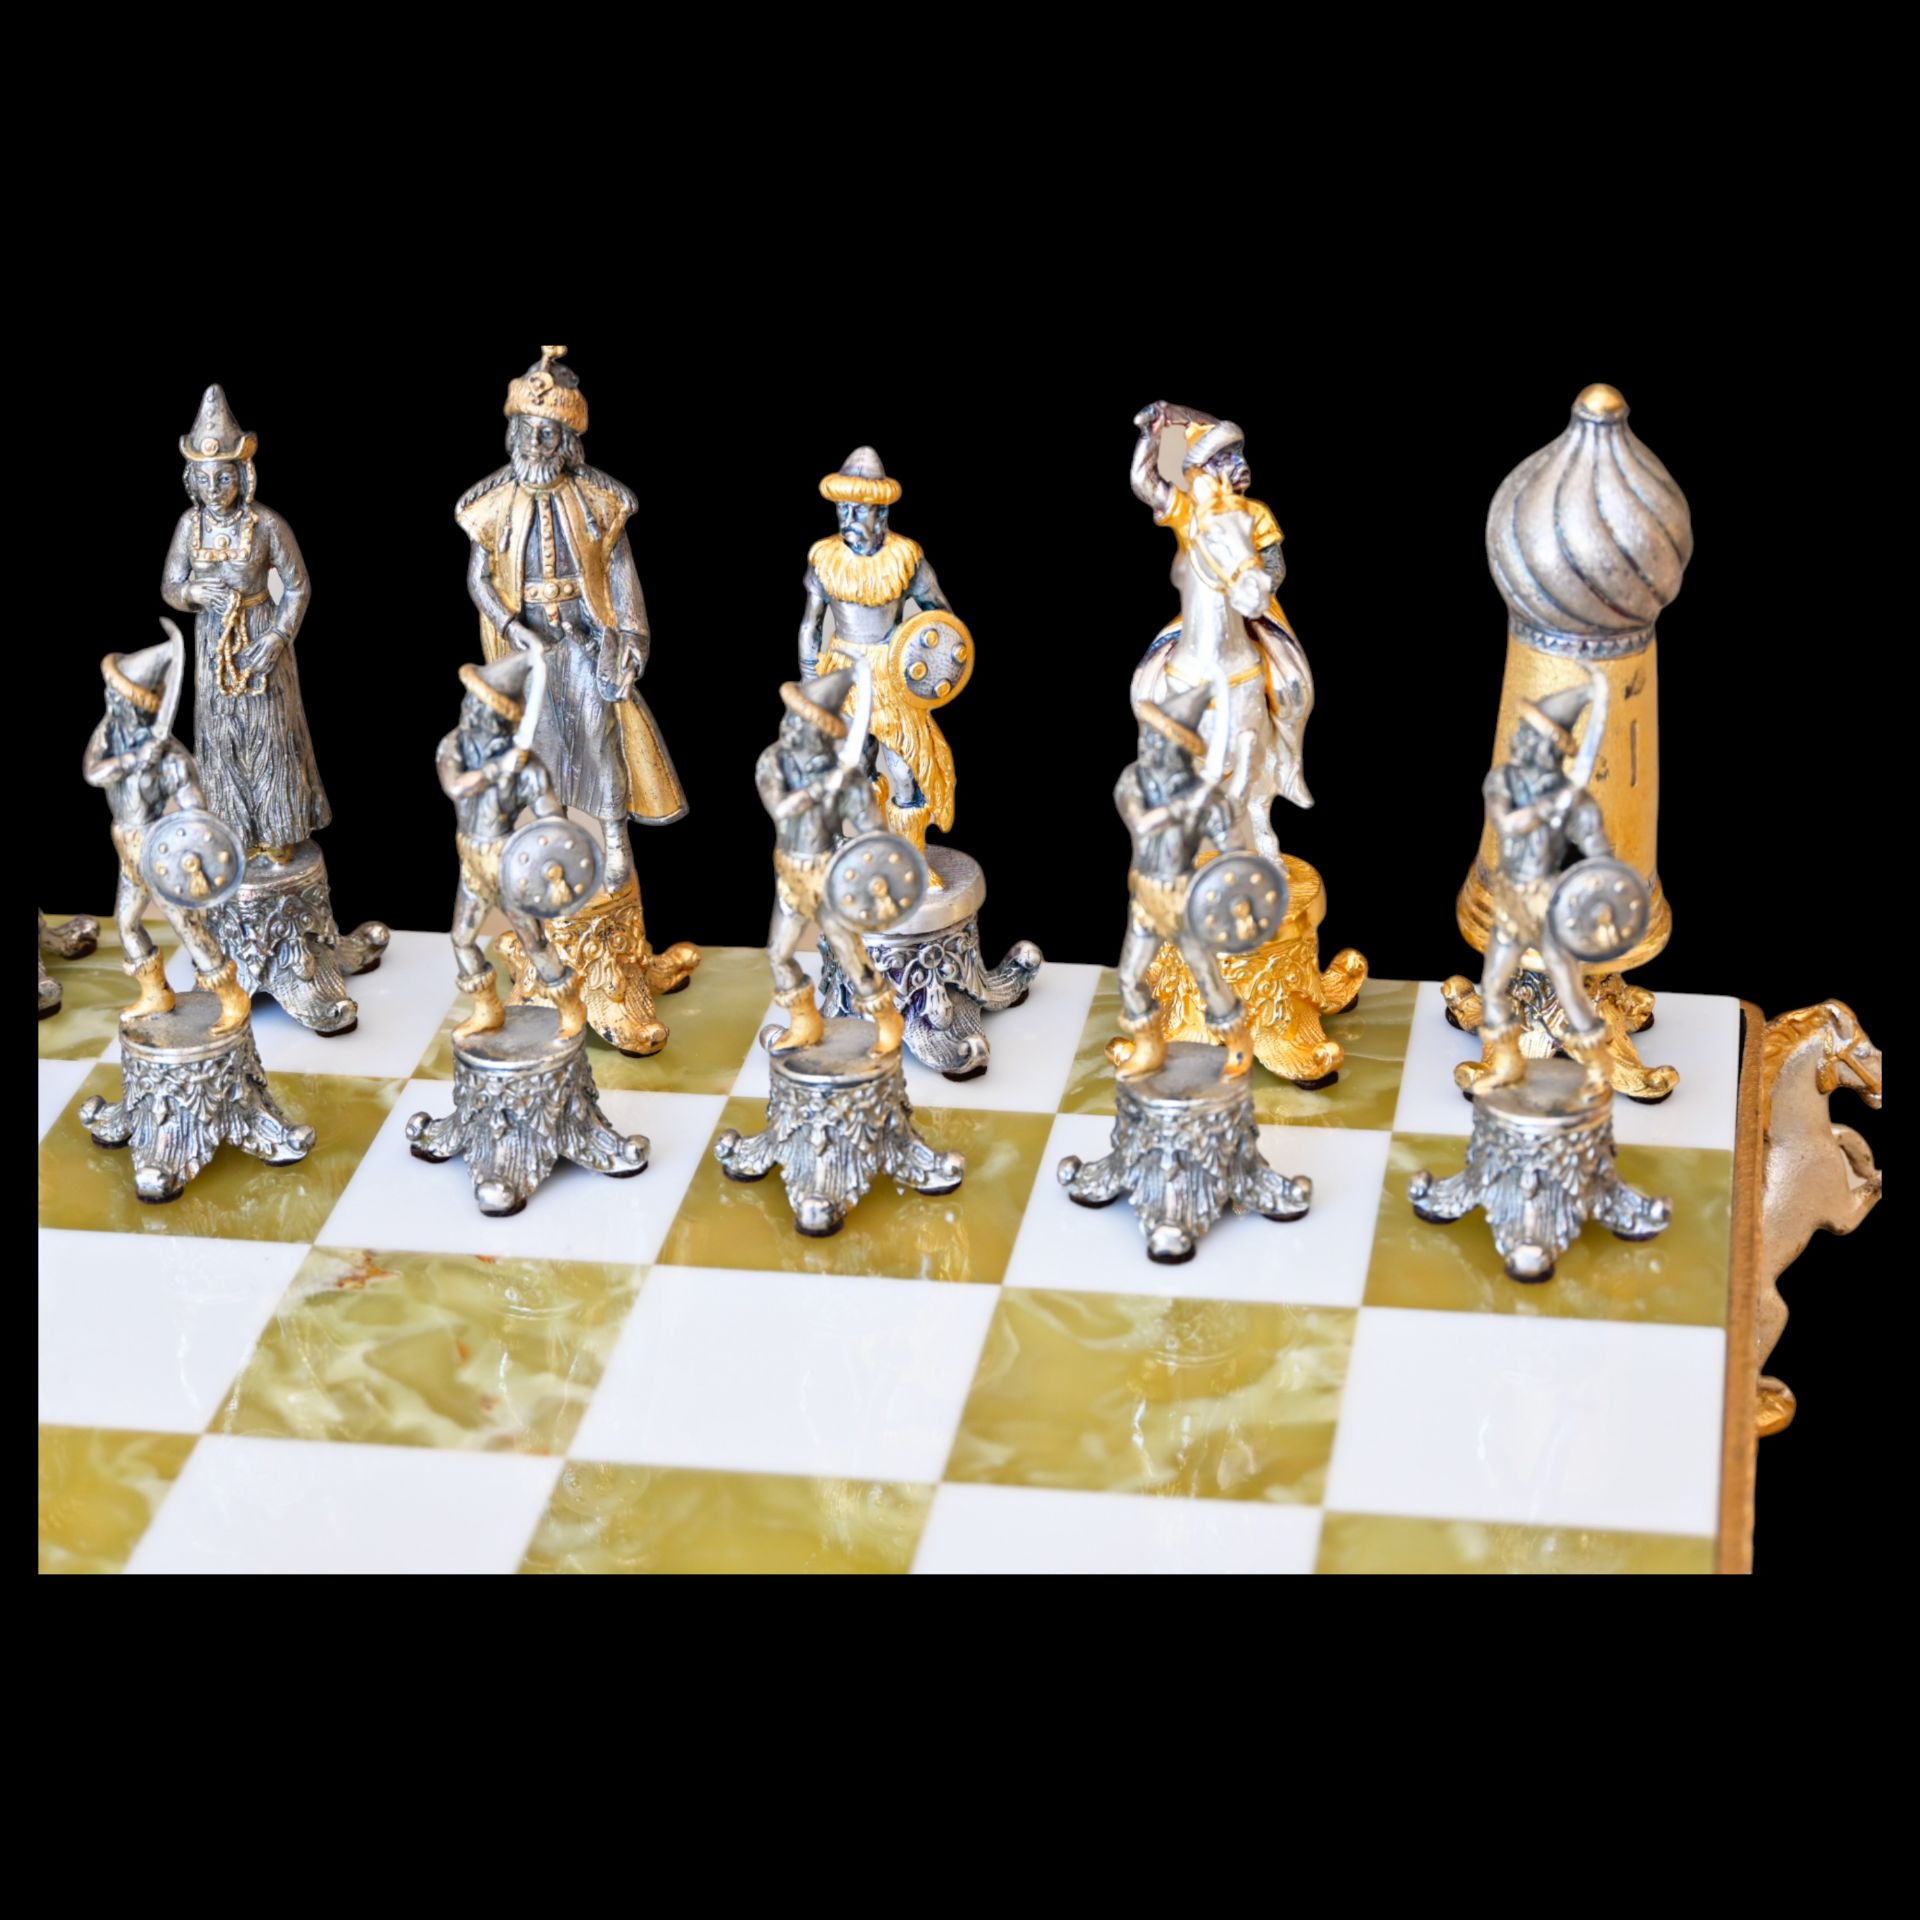 Piero Benzoni Onyx and Marble Silver-Plated and Gilt Bronze Chess Set, 70-80 years of the 20th _. - Bild 3 aus 13